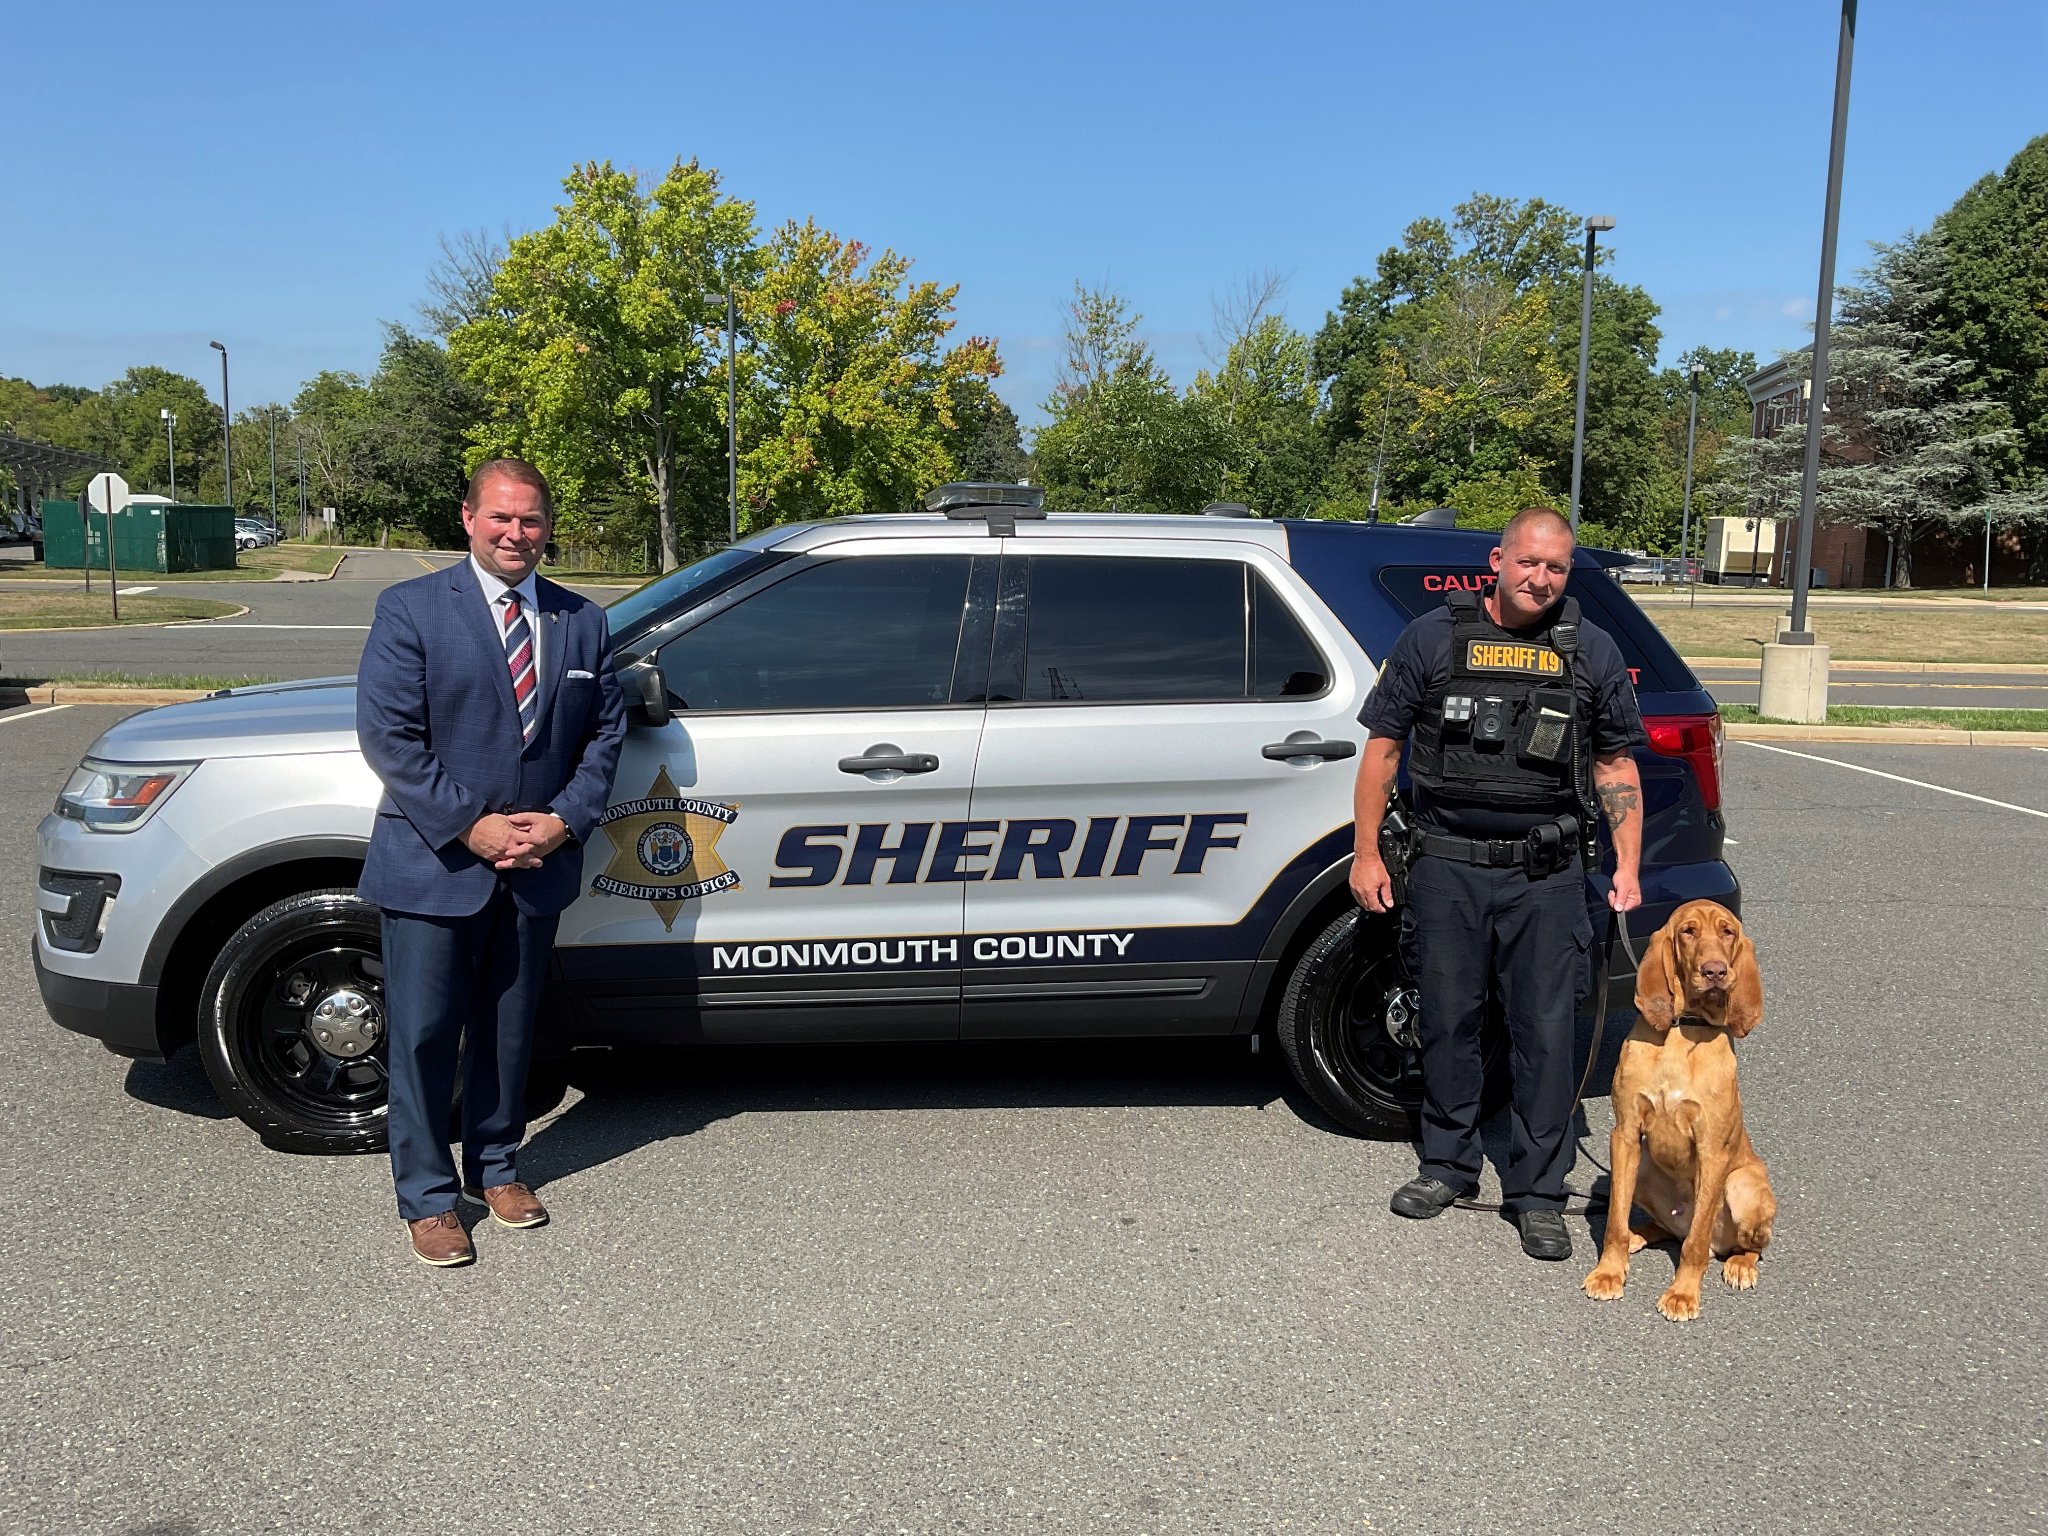 Newest Member Of The Monmouth County Sheriff's Office Has a Nose For  Sniffing Out Crime – Monmouth County Sheriff's Office